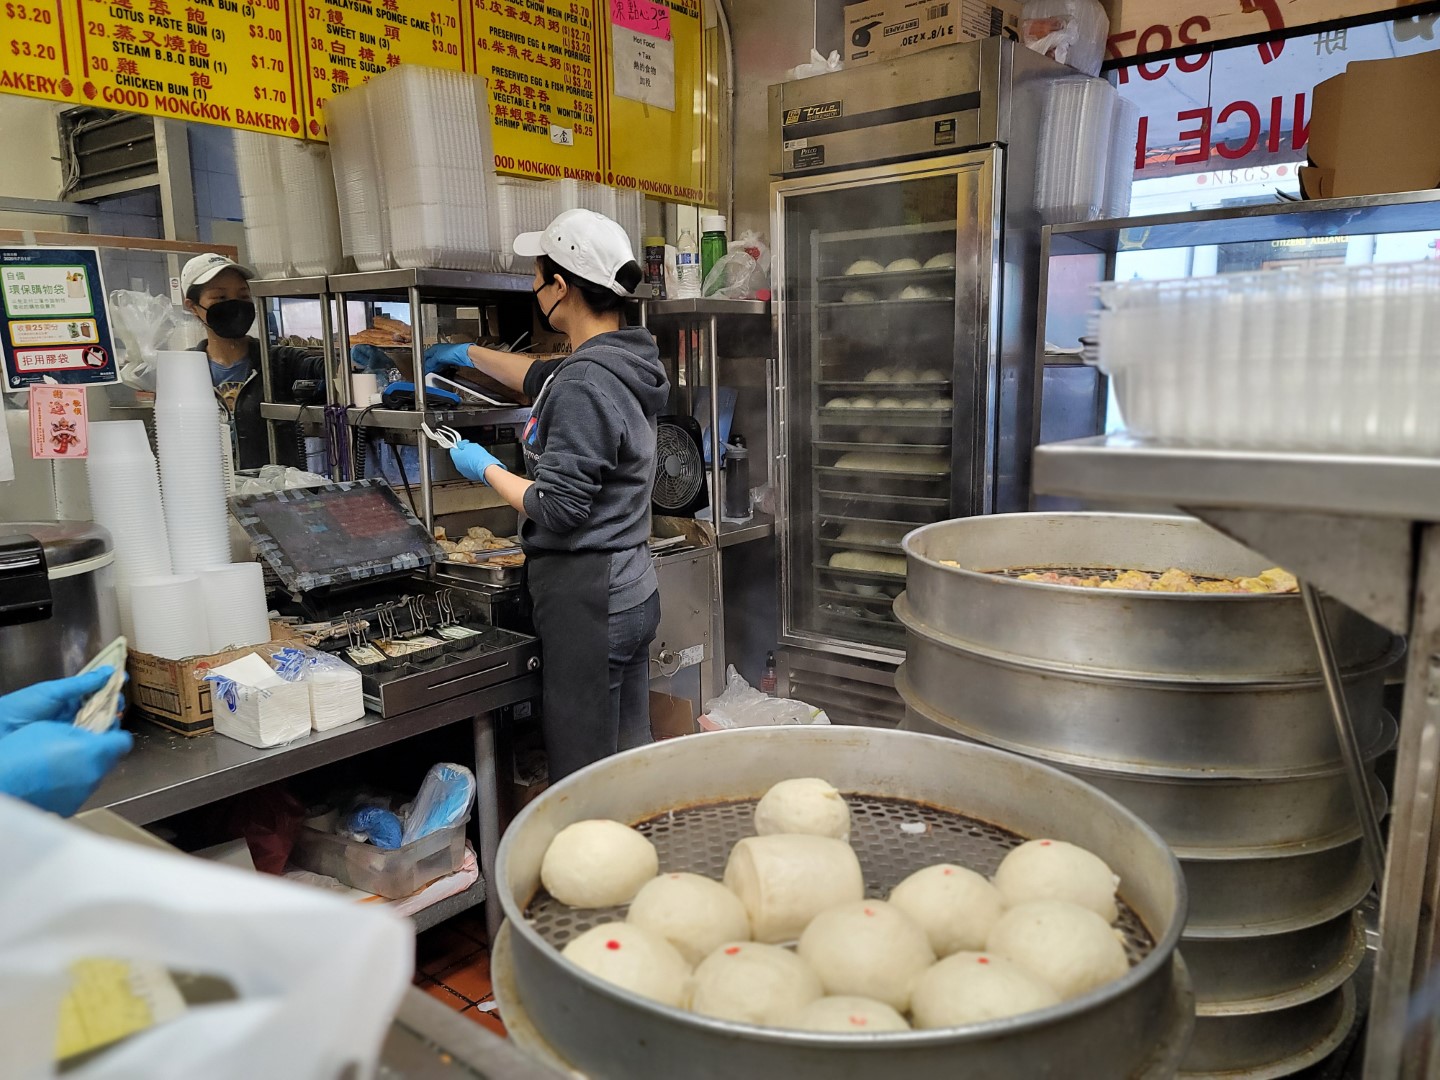 person cooking dumplings and buns in Chinatown restaurant